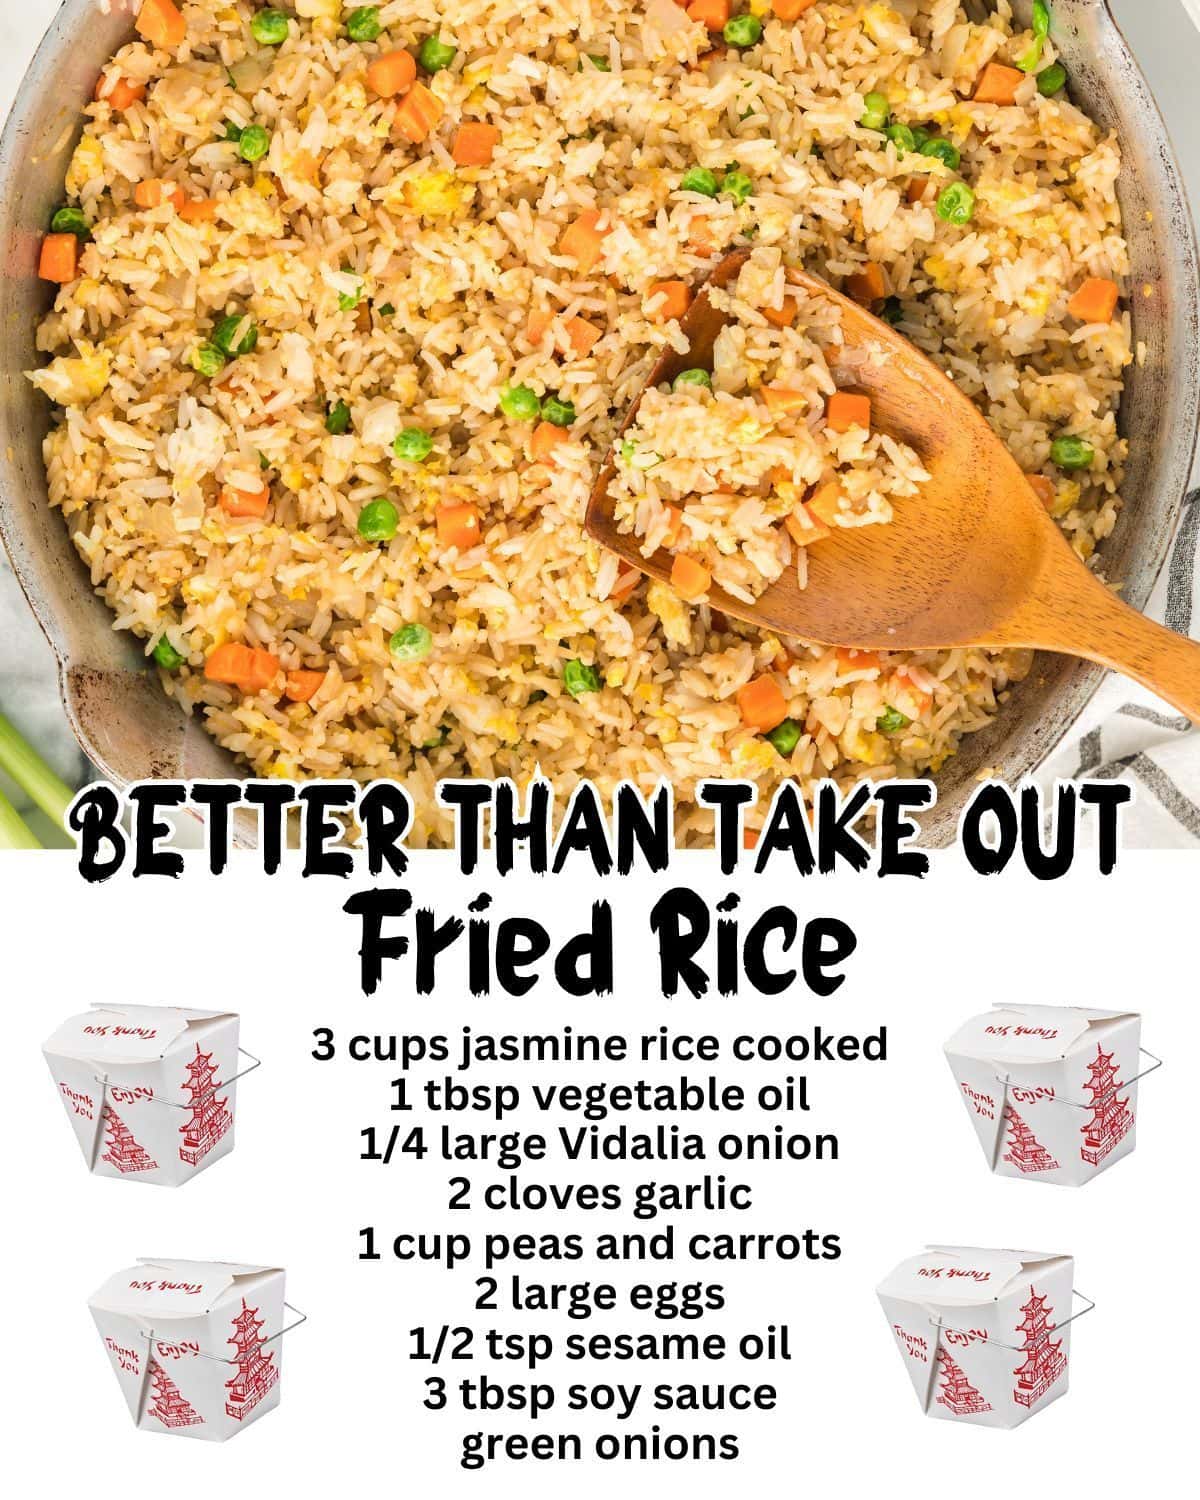 An overhead view of a skillet filled with fried rice garnished with green onions, next to a wooden spoon, with text overlay listing the ingredients and proclaiming 